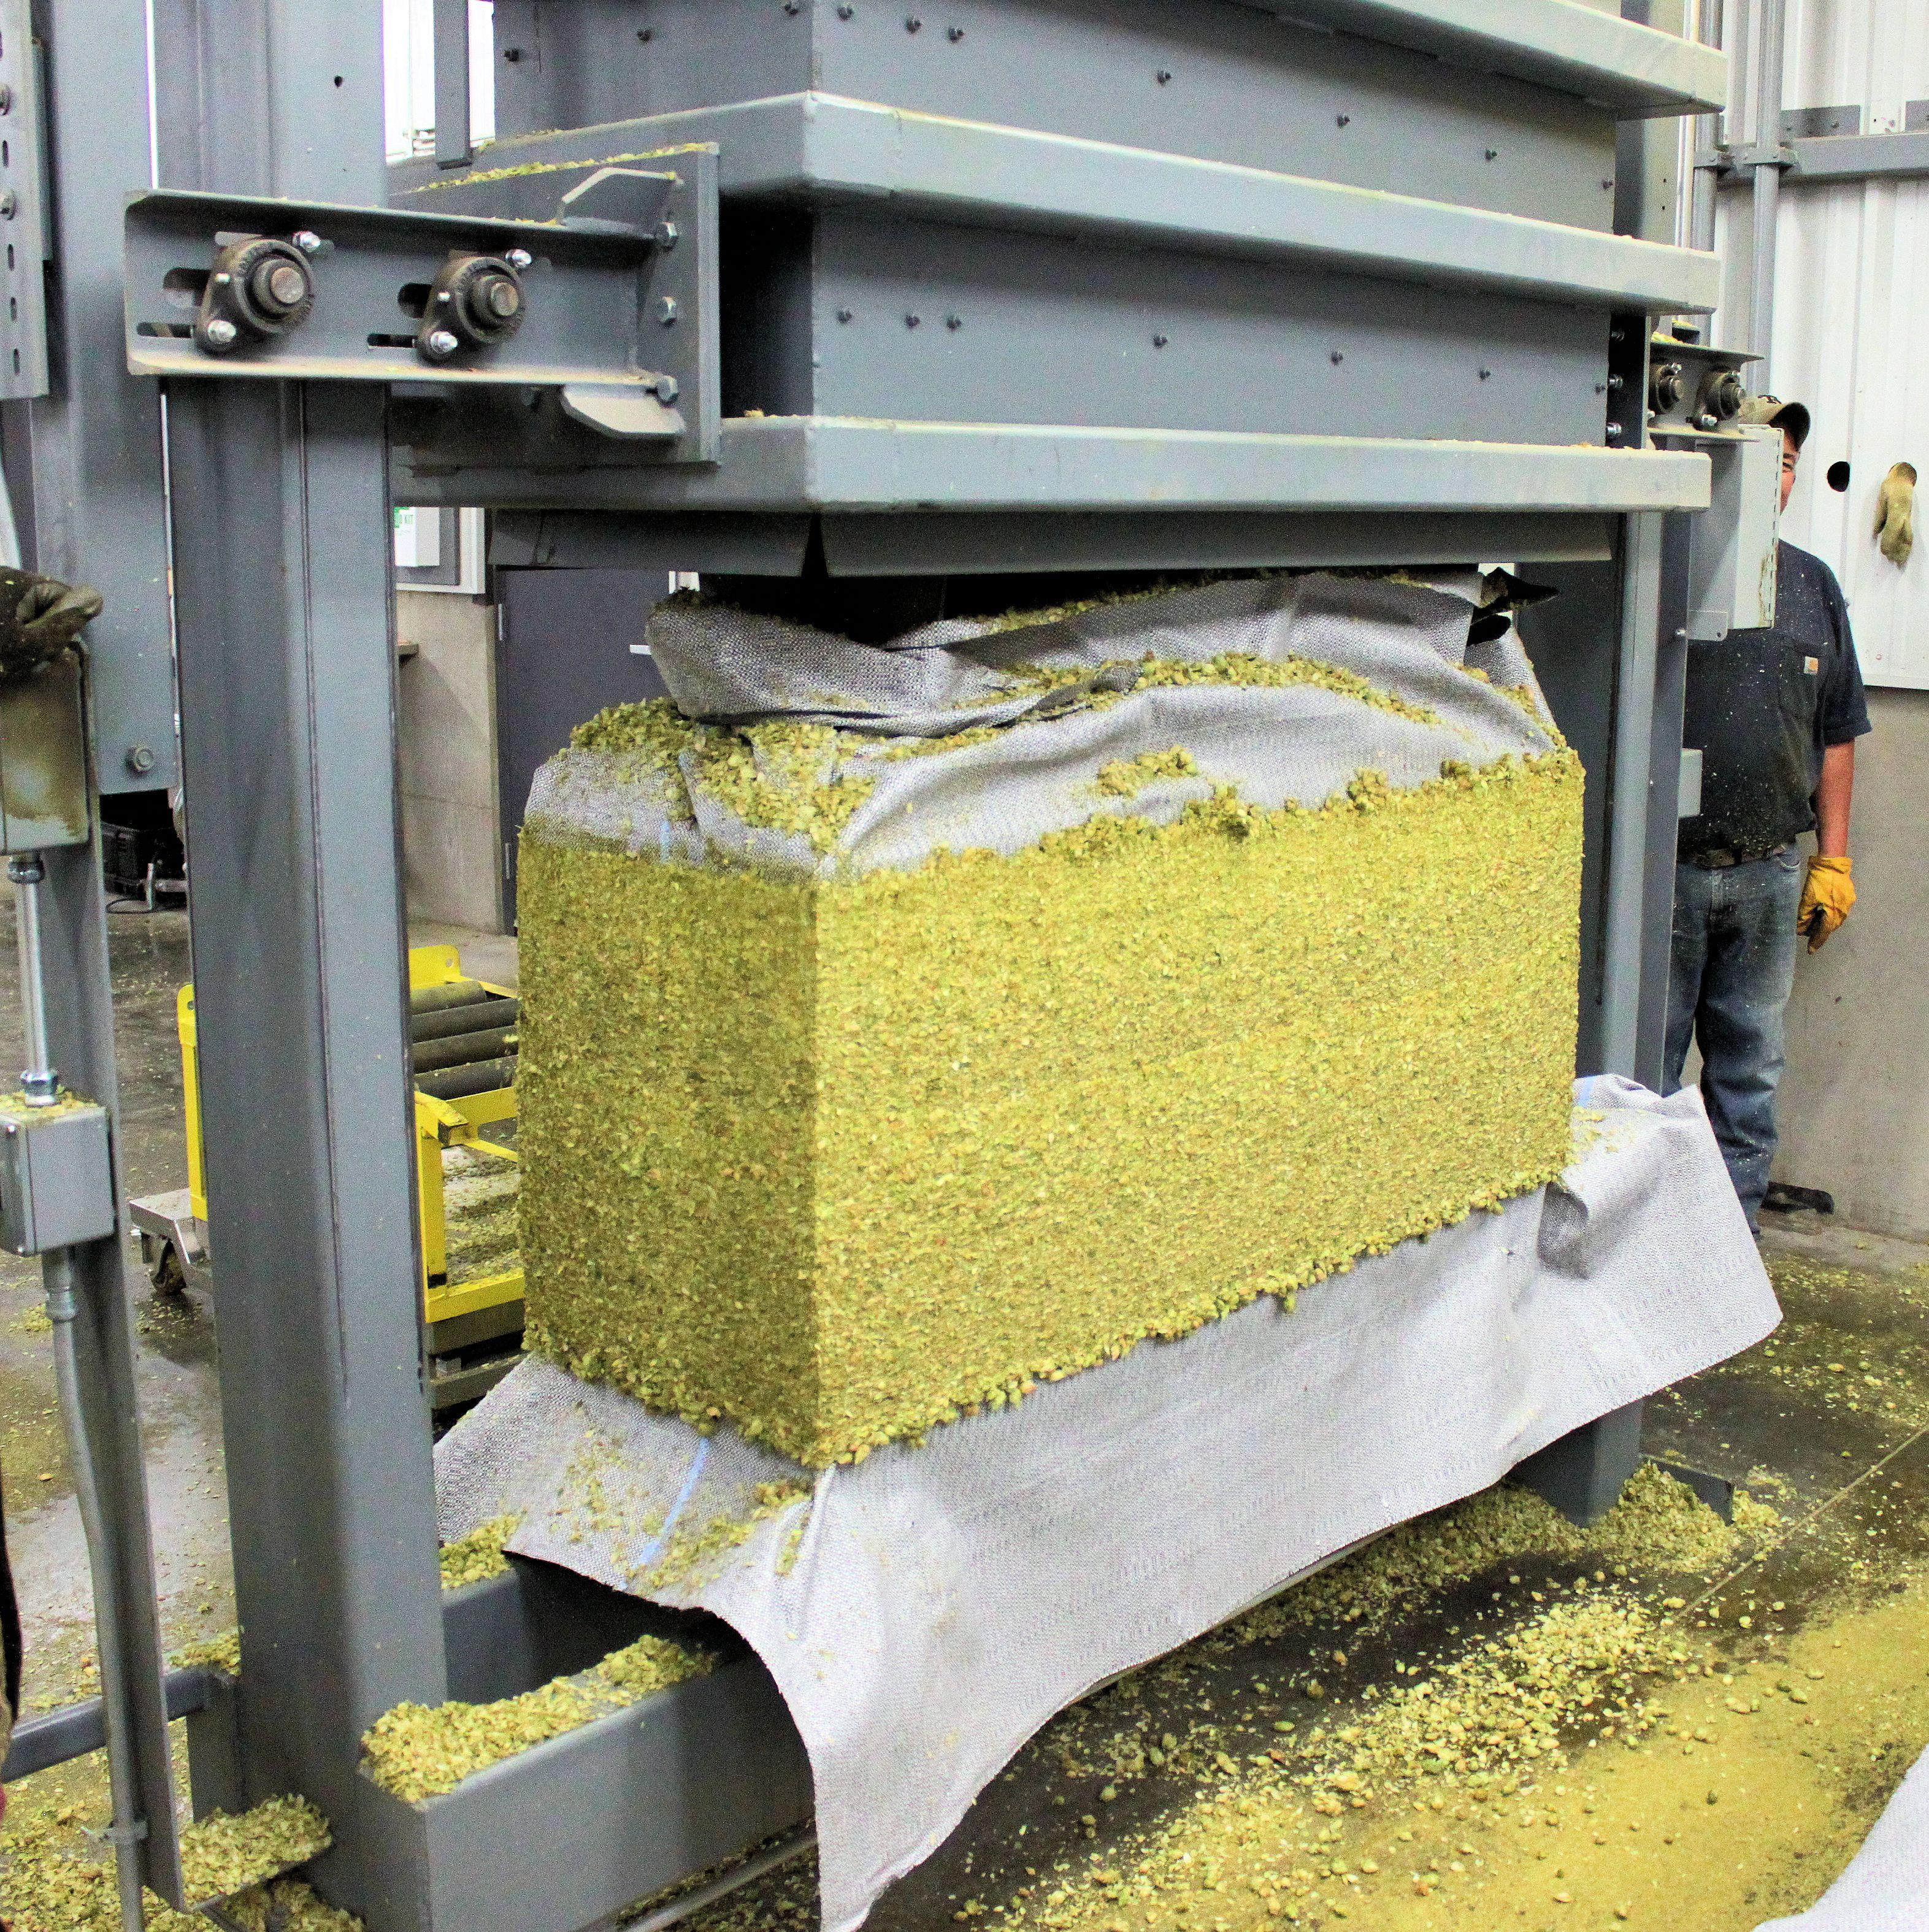 14 Dried hops pressed into a 200 lb. bale